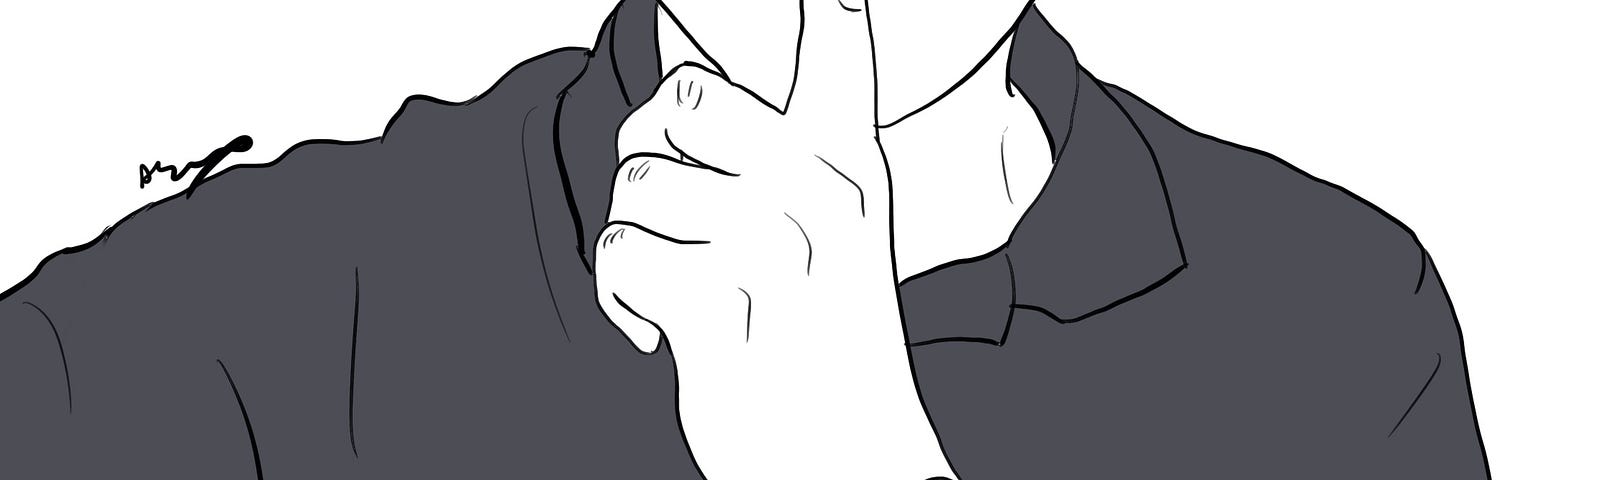 Illustration of author holding a finger to their lips